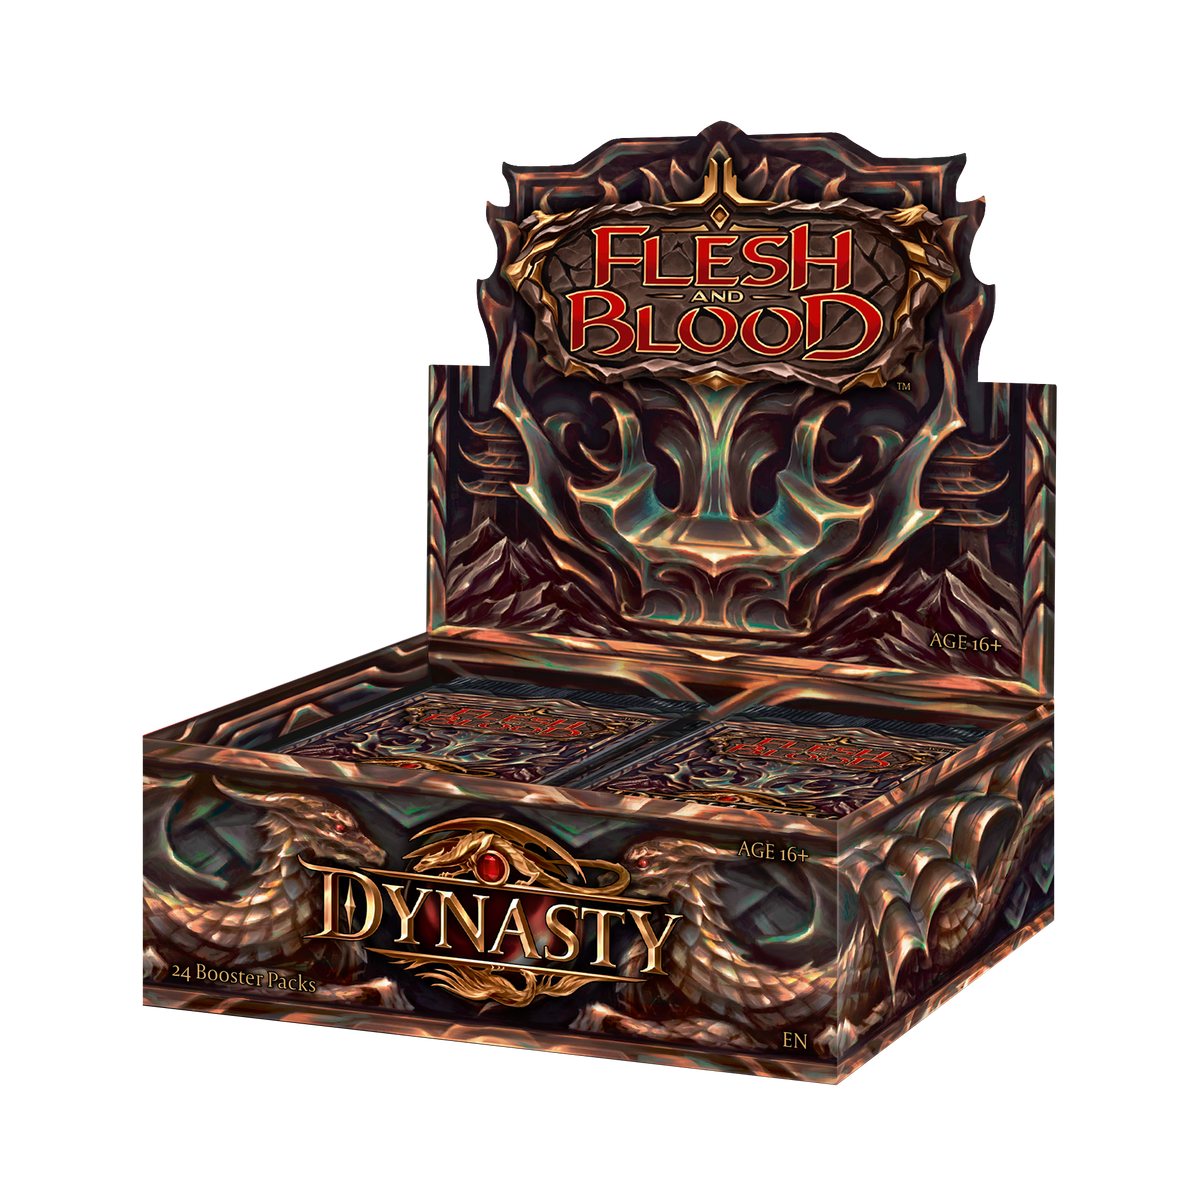 Flesh and Blood TCG - Dynasty Booster Box